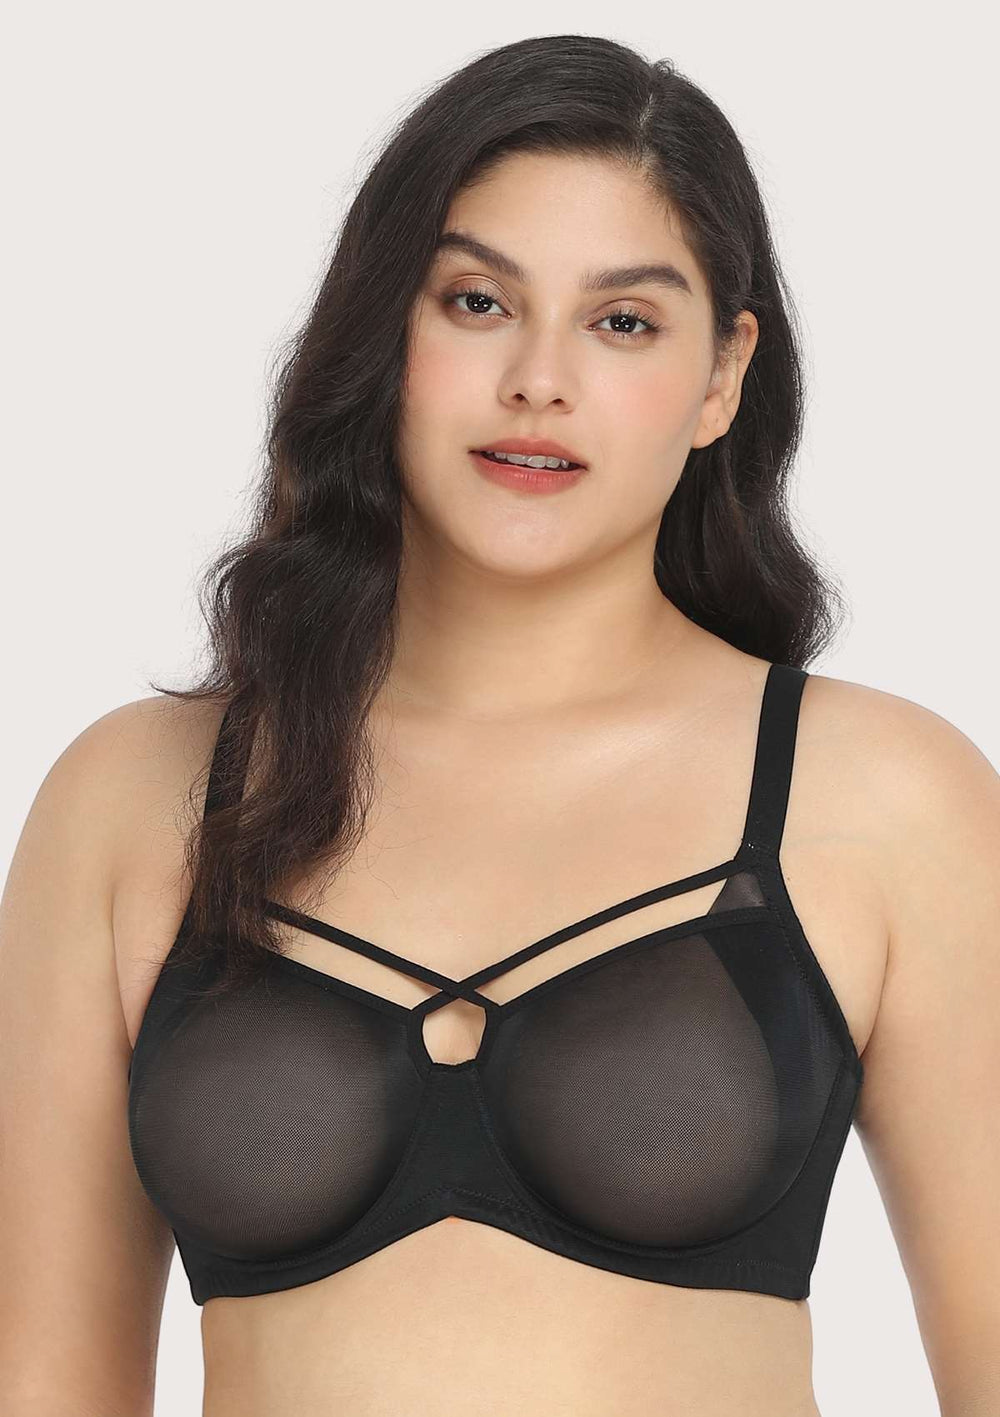 UP TO 15% OFF! Women's Sheer Mesh Bra See Through Unlined Sexy